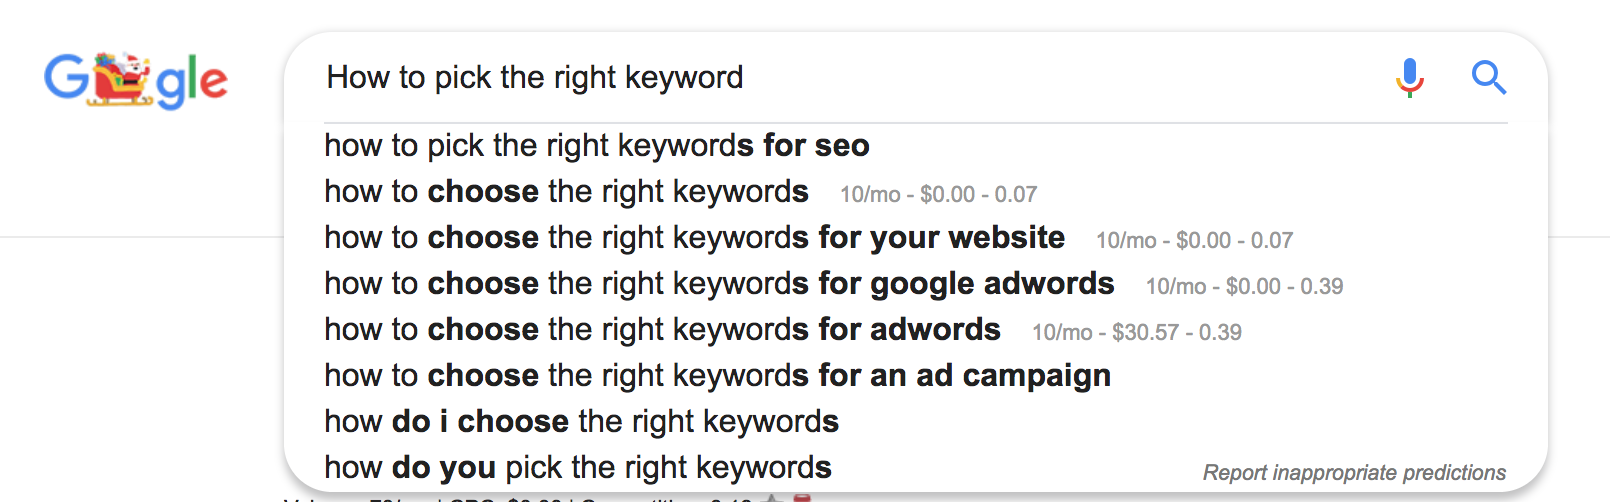 How To Pick The Right Keywords